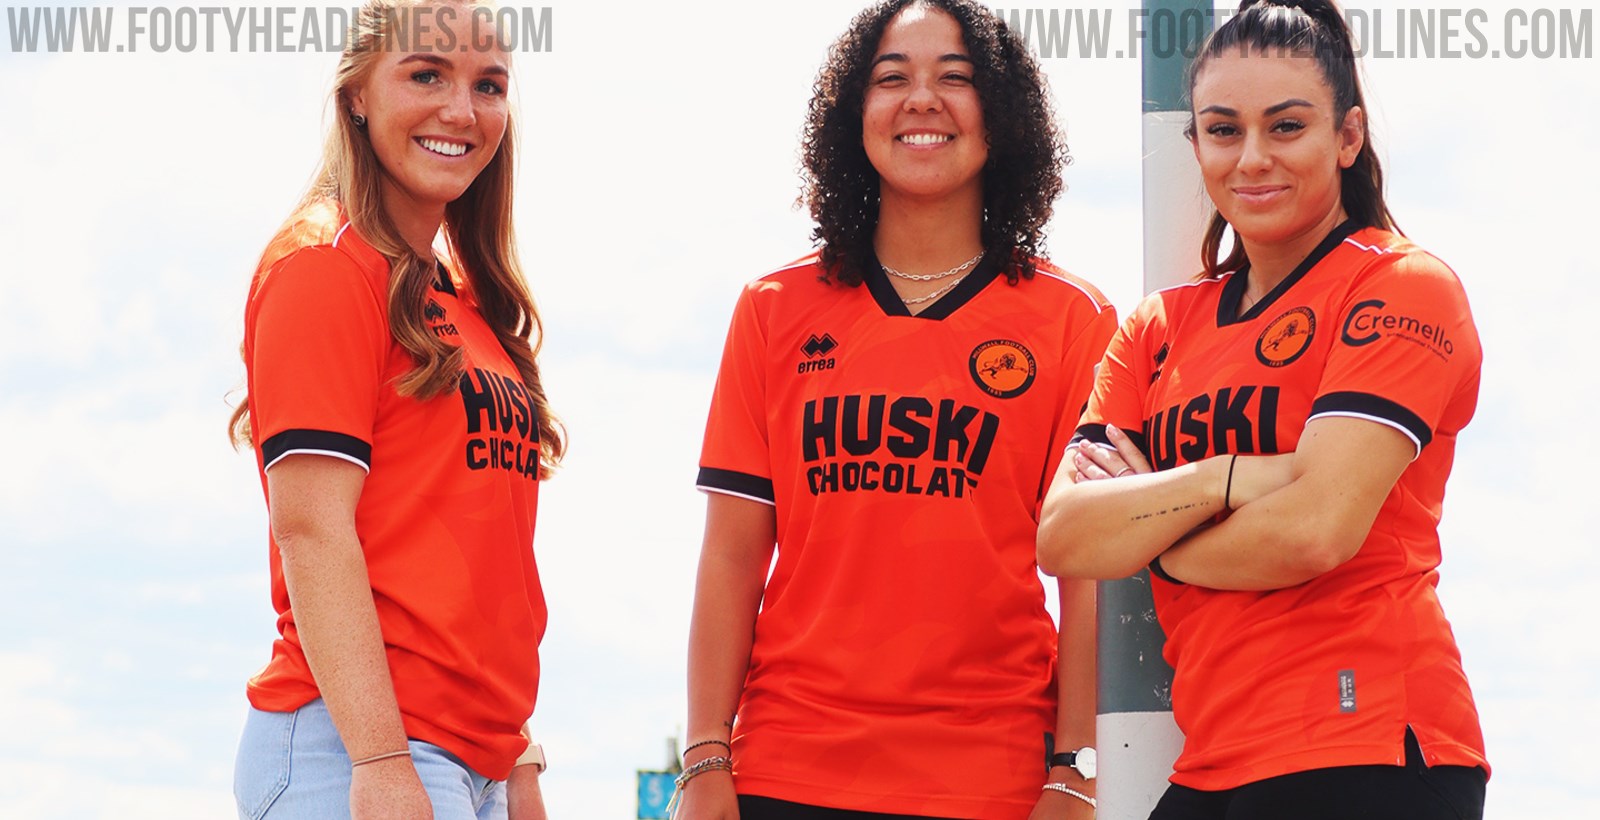 Errea present Millwall FC 2023/24 Third kit, in orange & inspired by the  lion's mane!